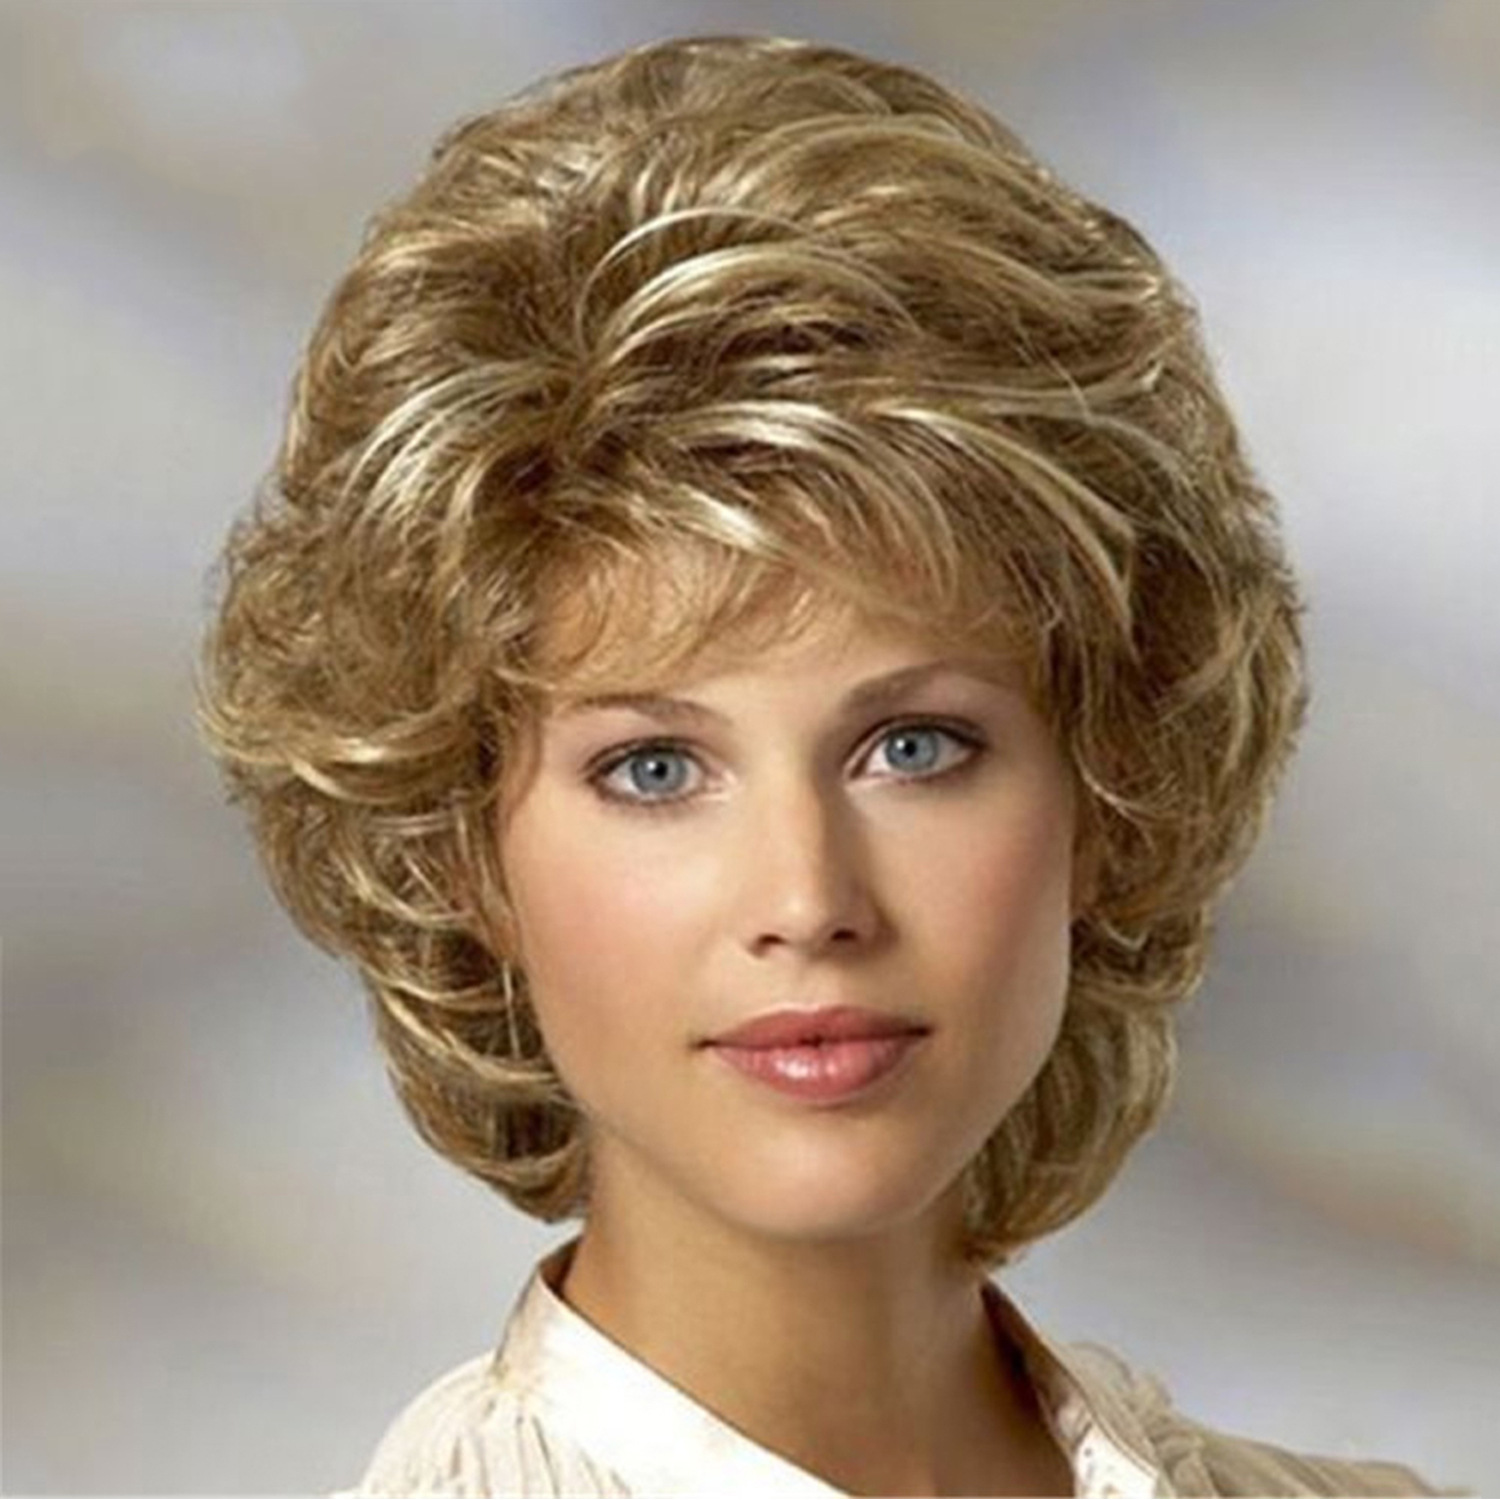 A small curly wig headgear for women, featuring light blonde short curly hair, perfect for various styles